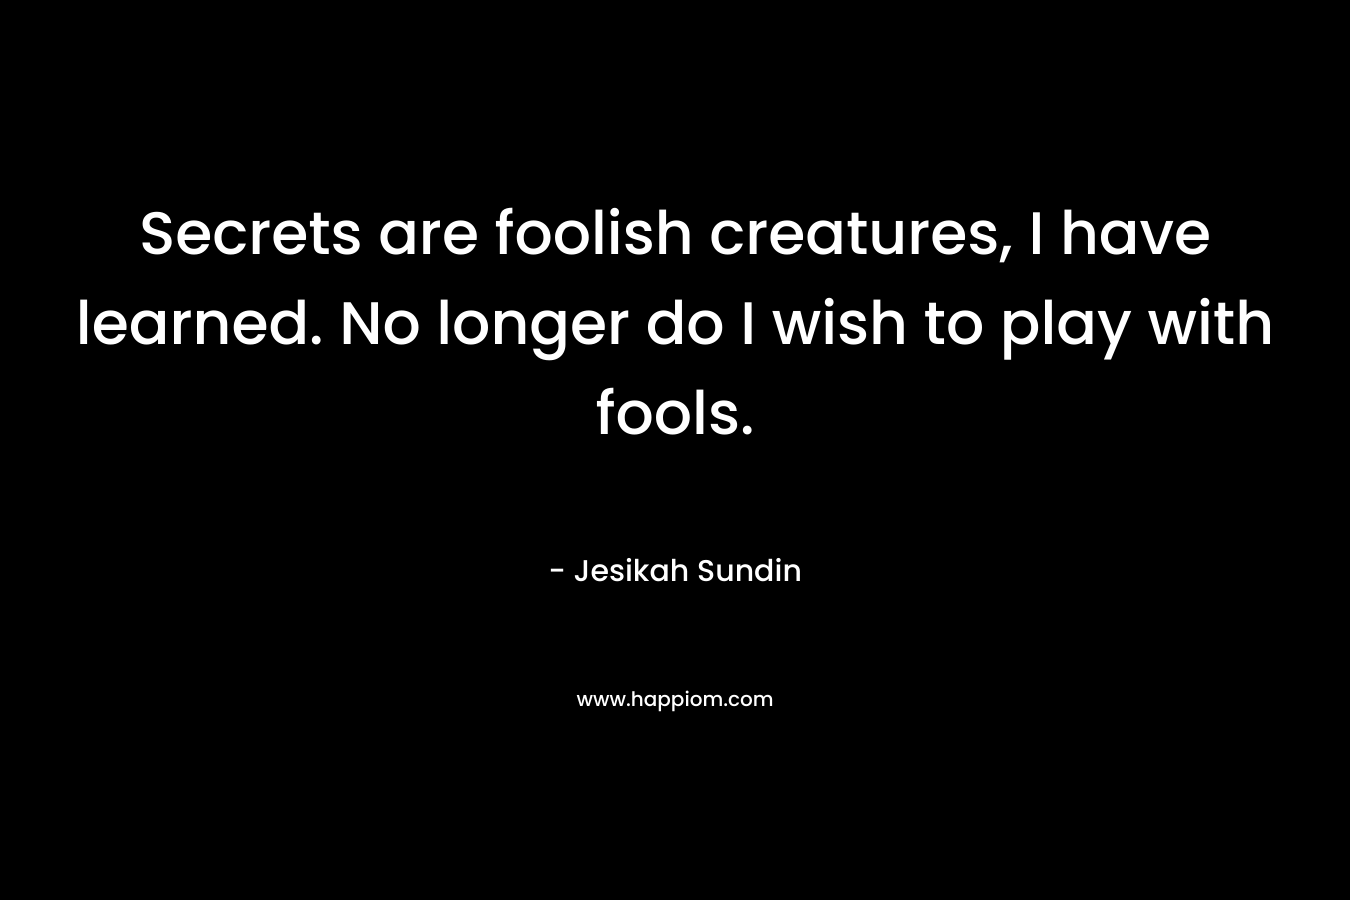 Secrets are foolish creatures, I have learned. No longer do I wish to play with fools. – Jesikah Sundin